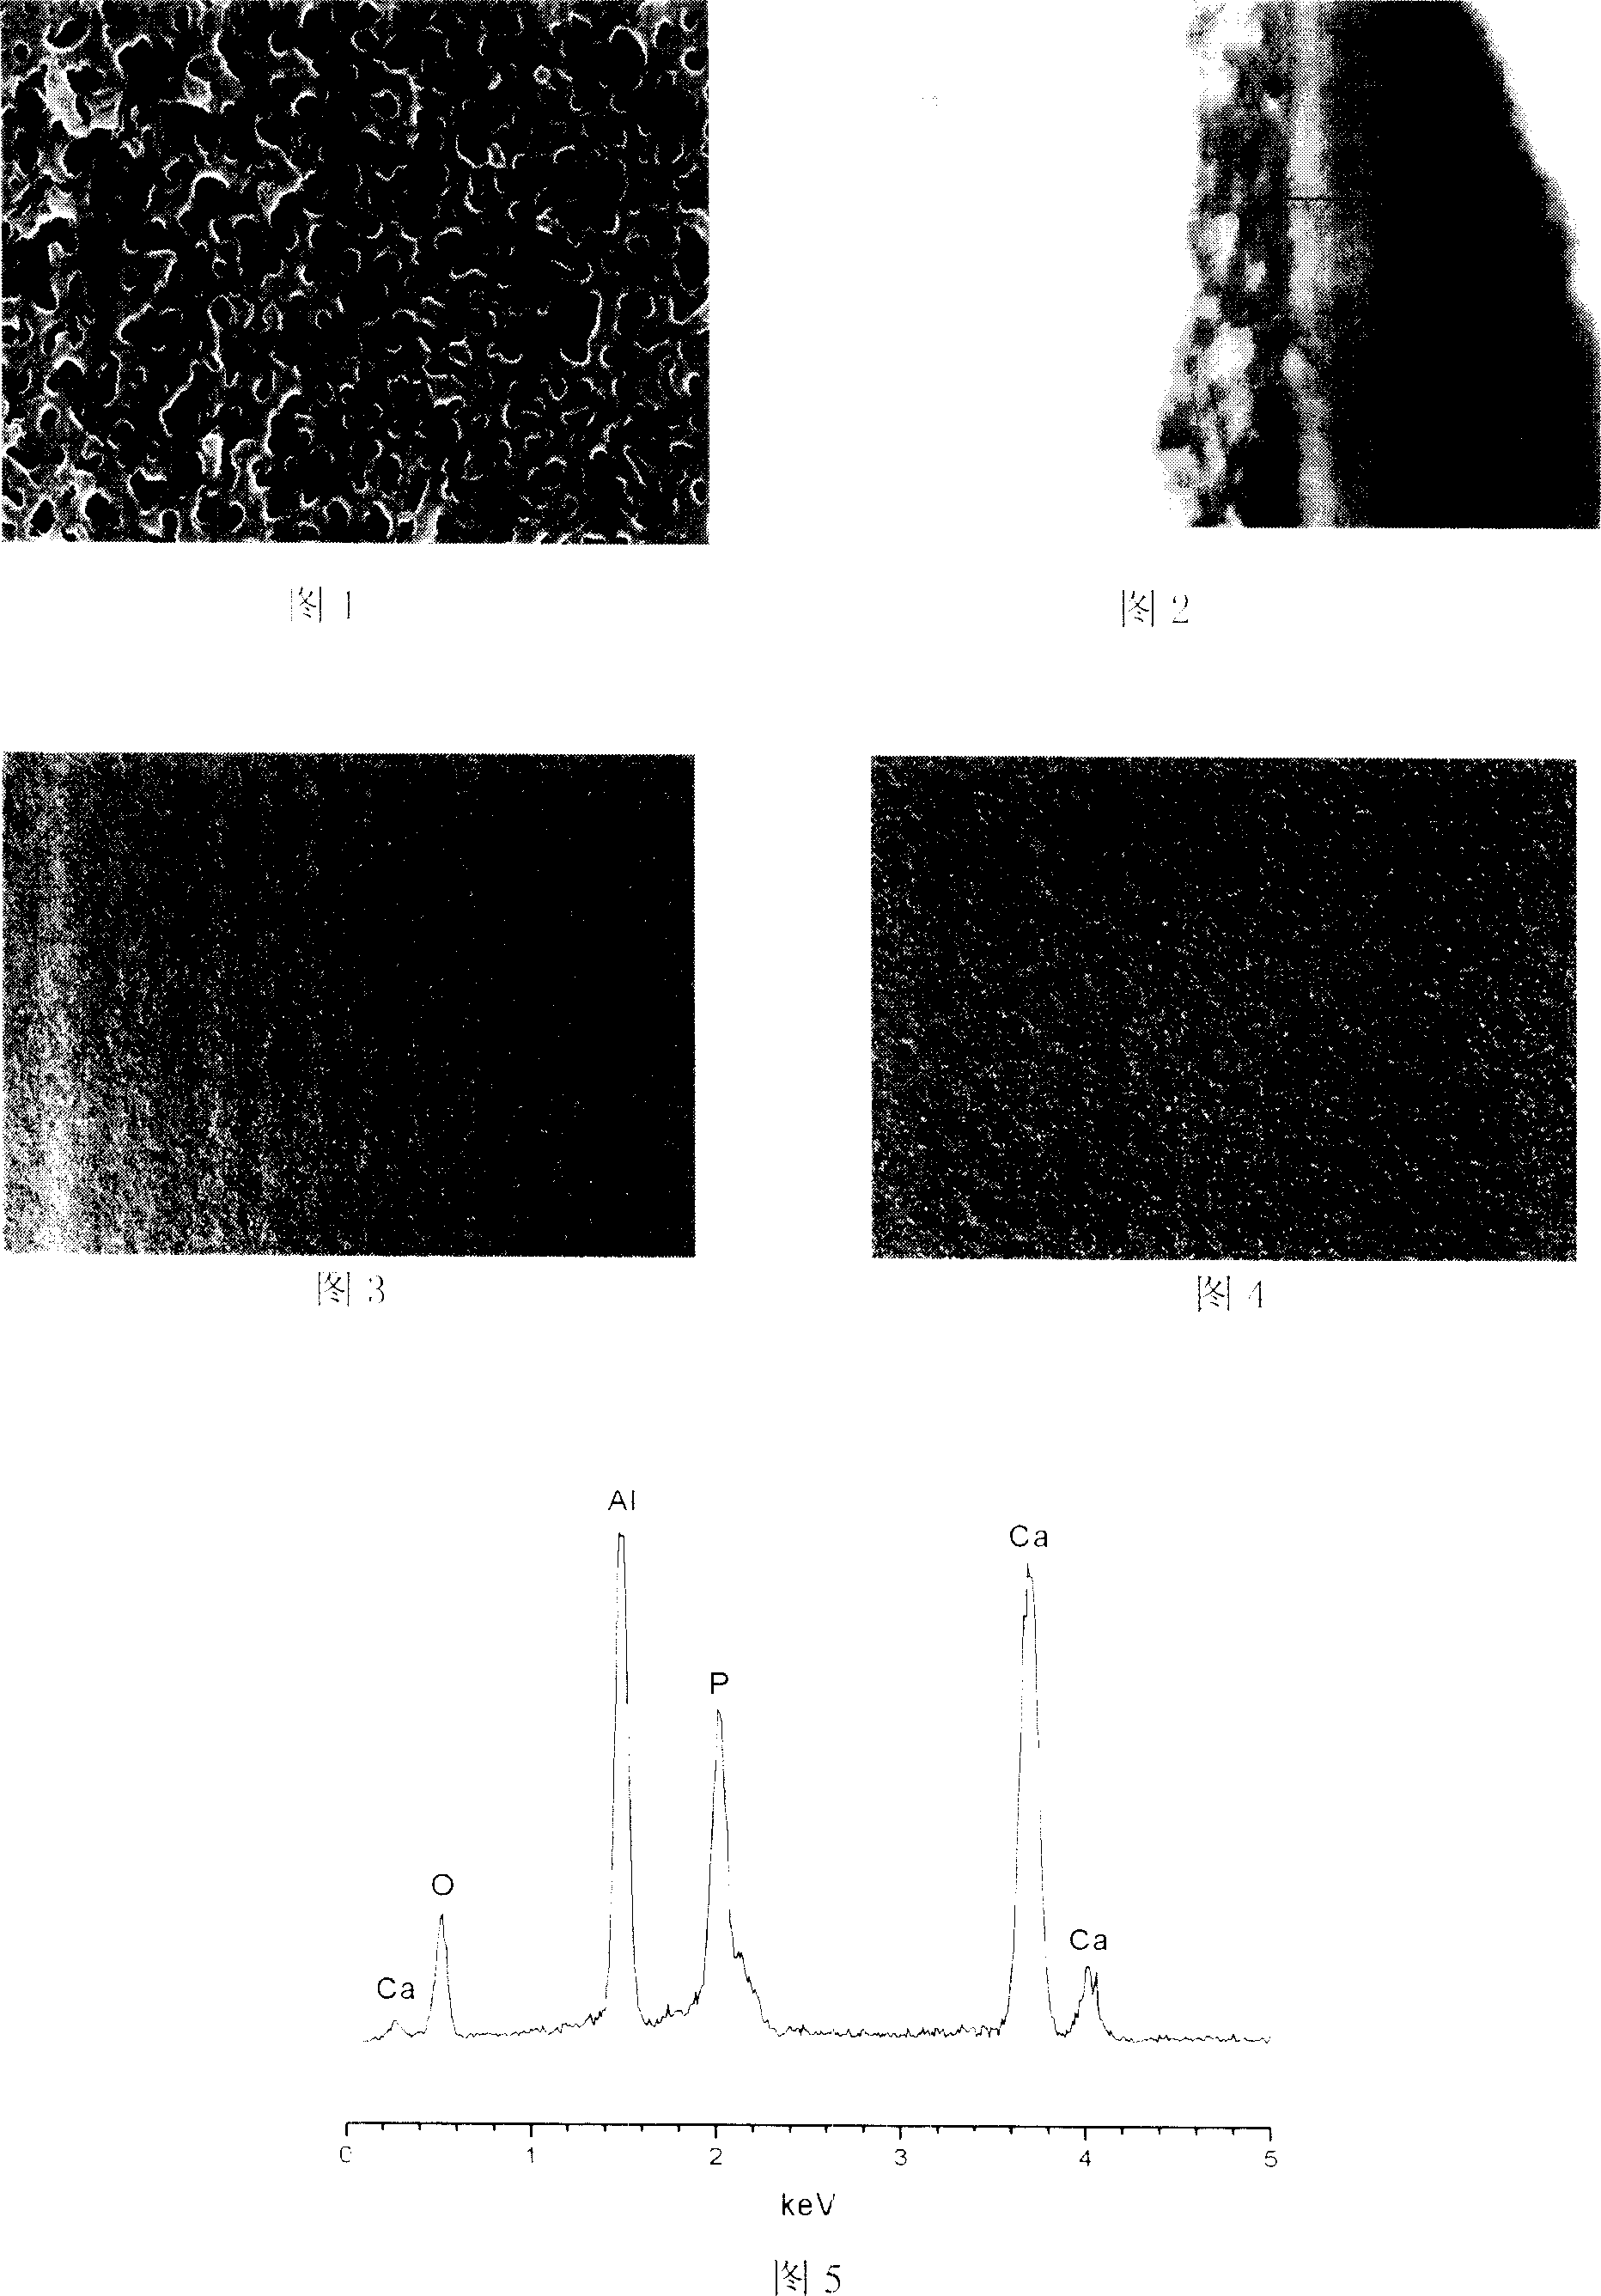 Process for preparing composite coat of hydroxy apatite and aluminum oxide